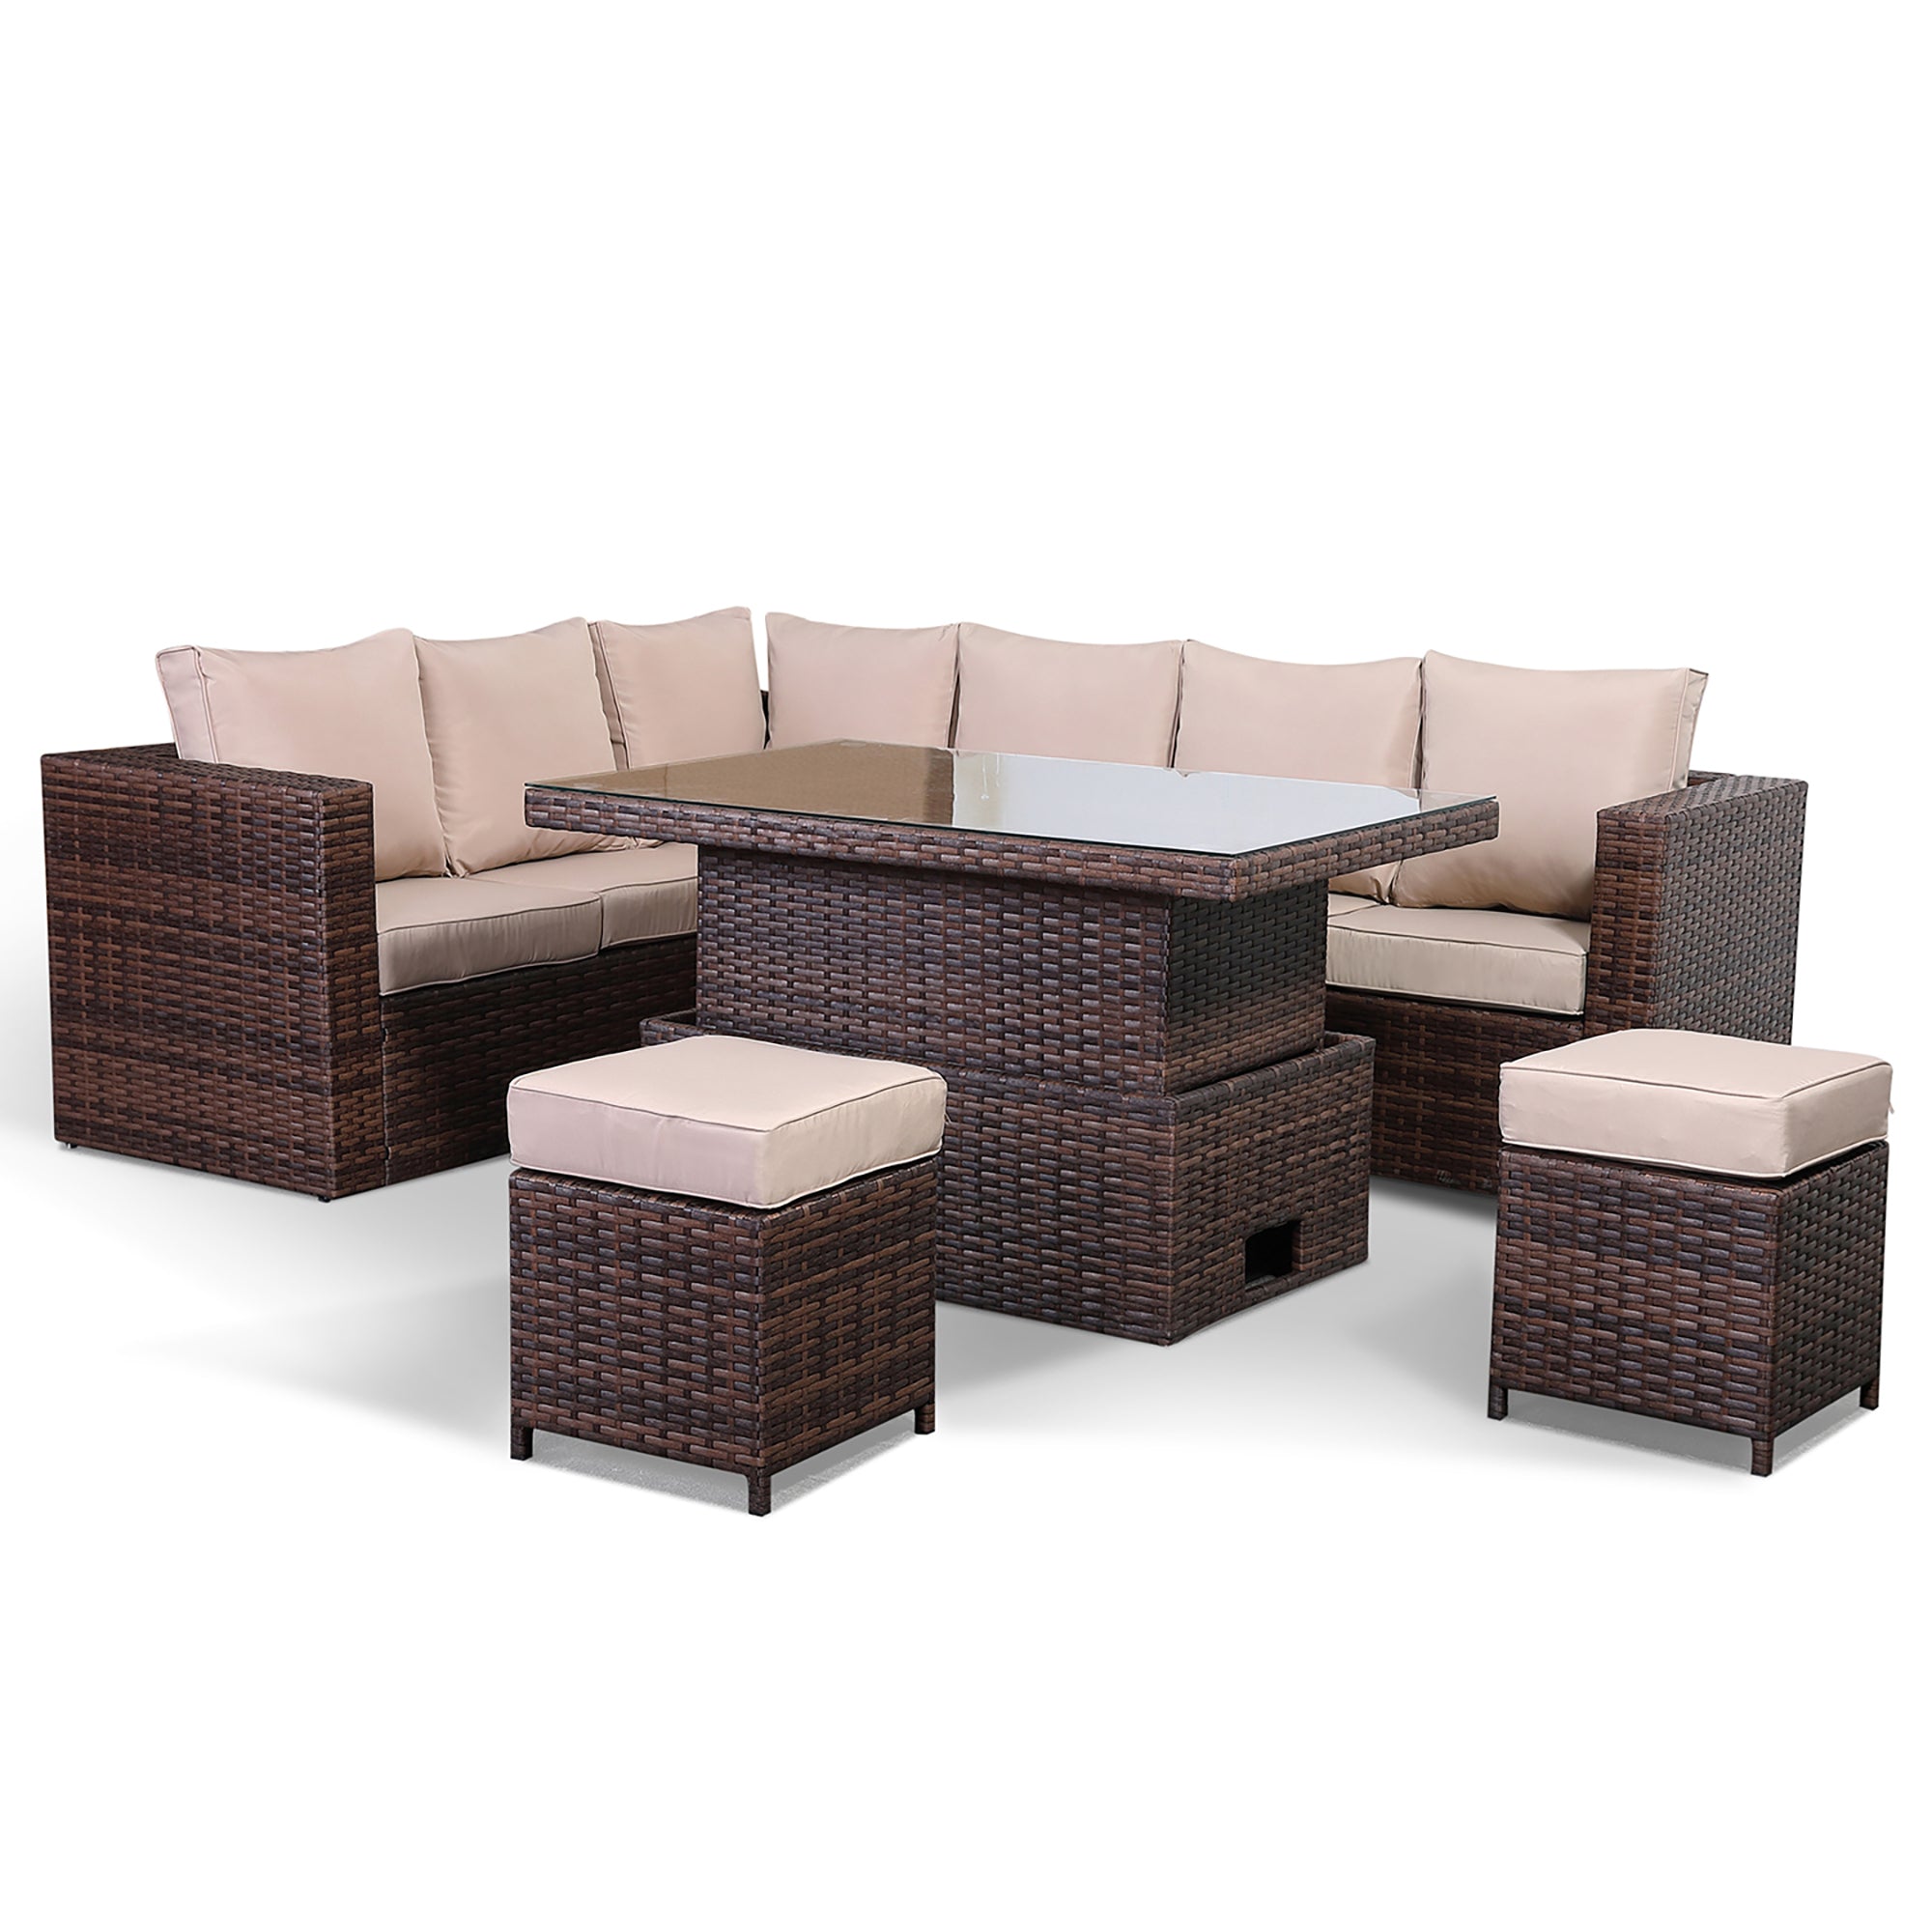 Rattan Park Range Left Hand Large Corner Set with Rising table and 2 Stools with Cushions